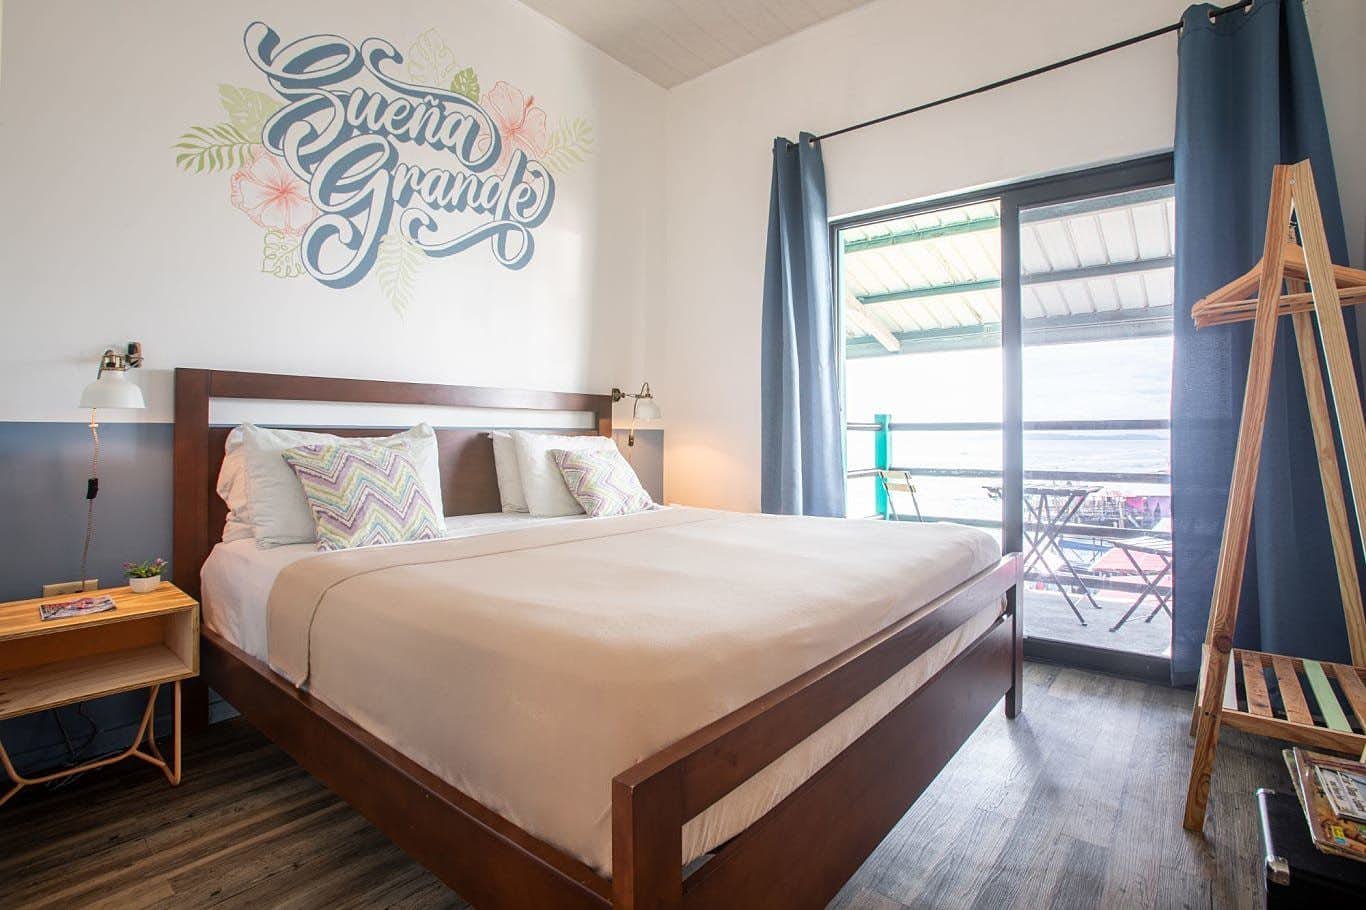 Standard - 7 nights surf lesson + cowork package